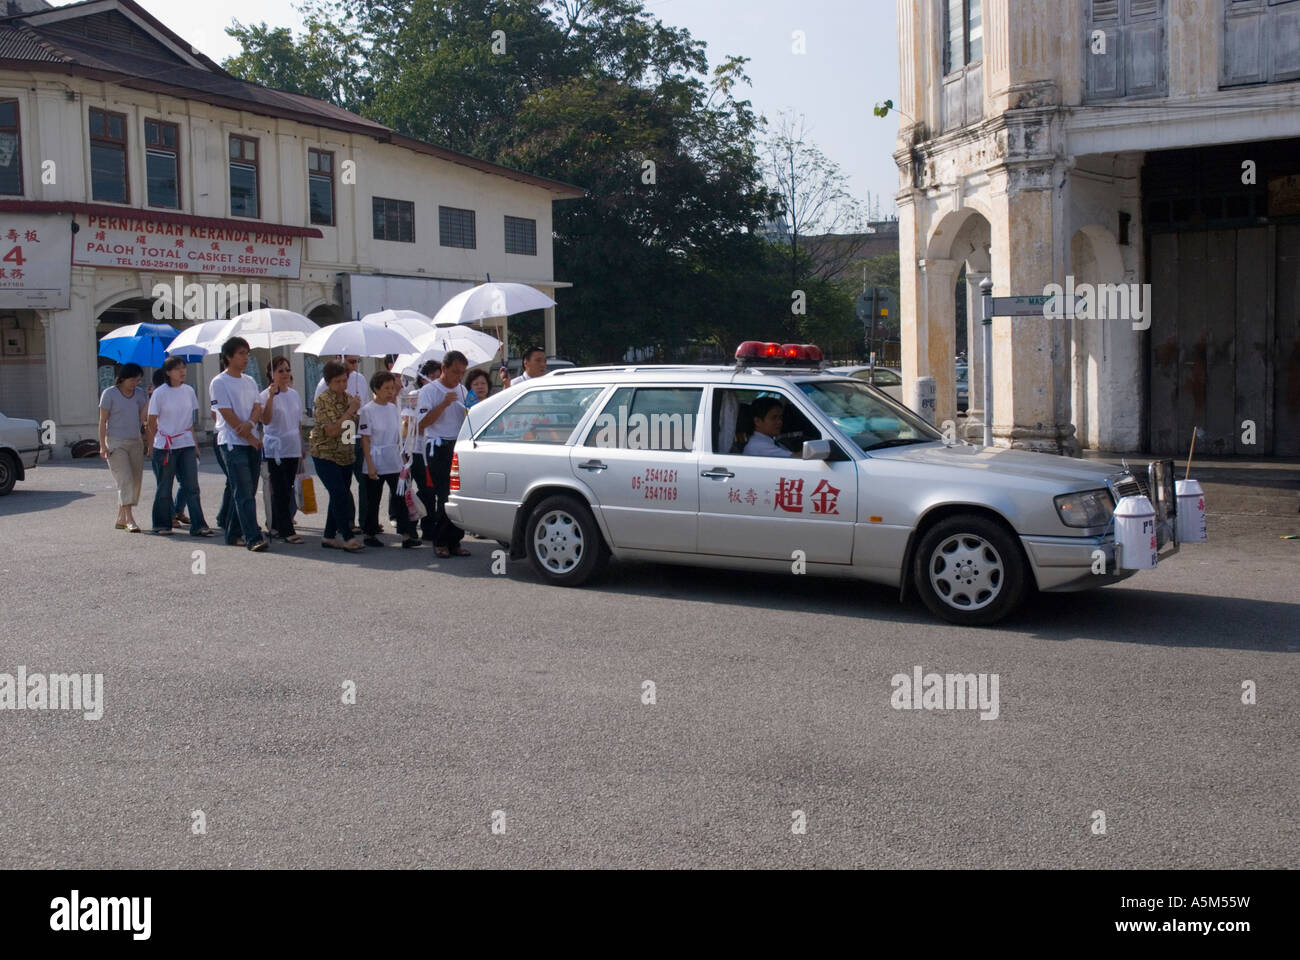 A Chinese funeral procession walking behind a hearse in Ipoh Malaysia Stock Photo